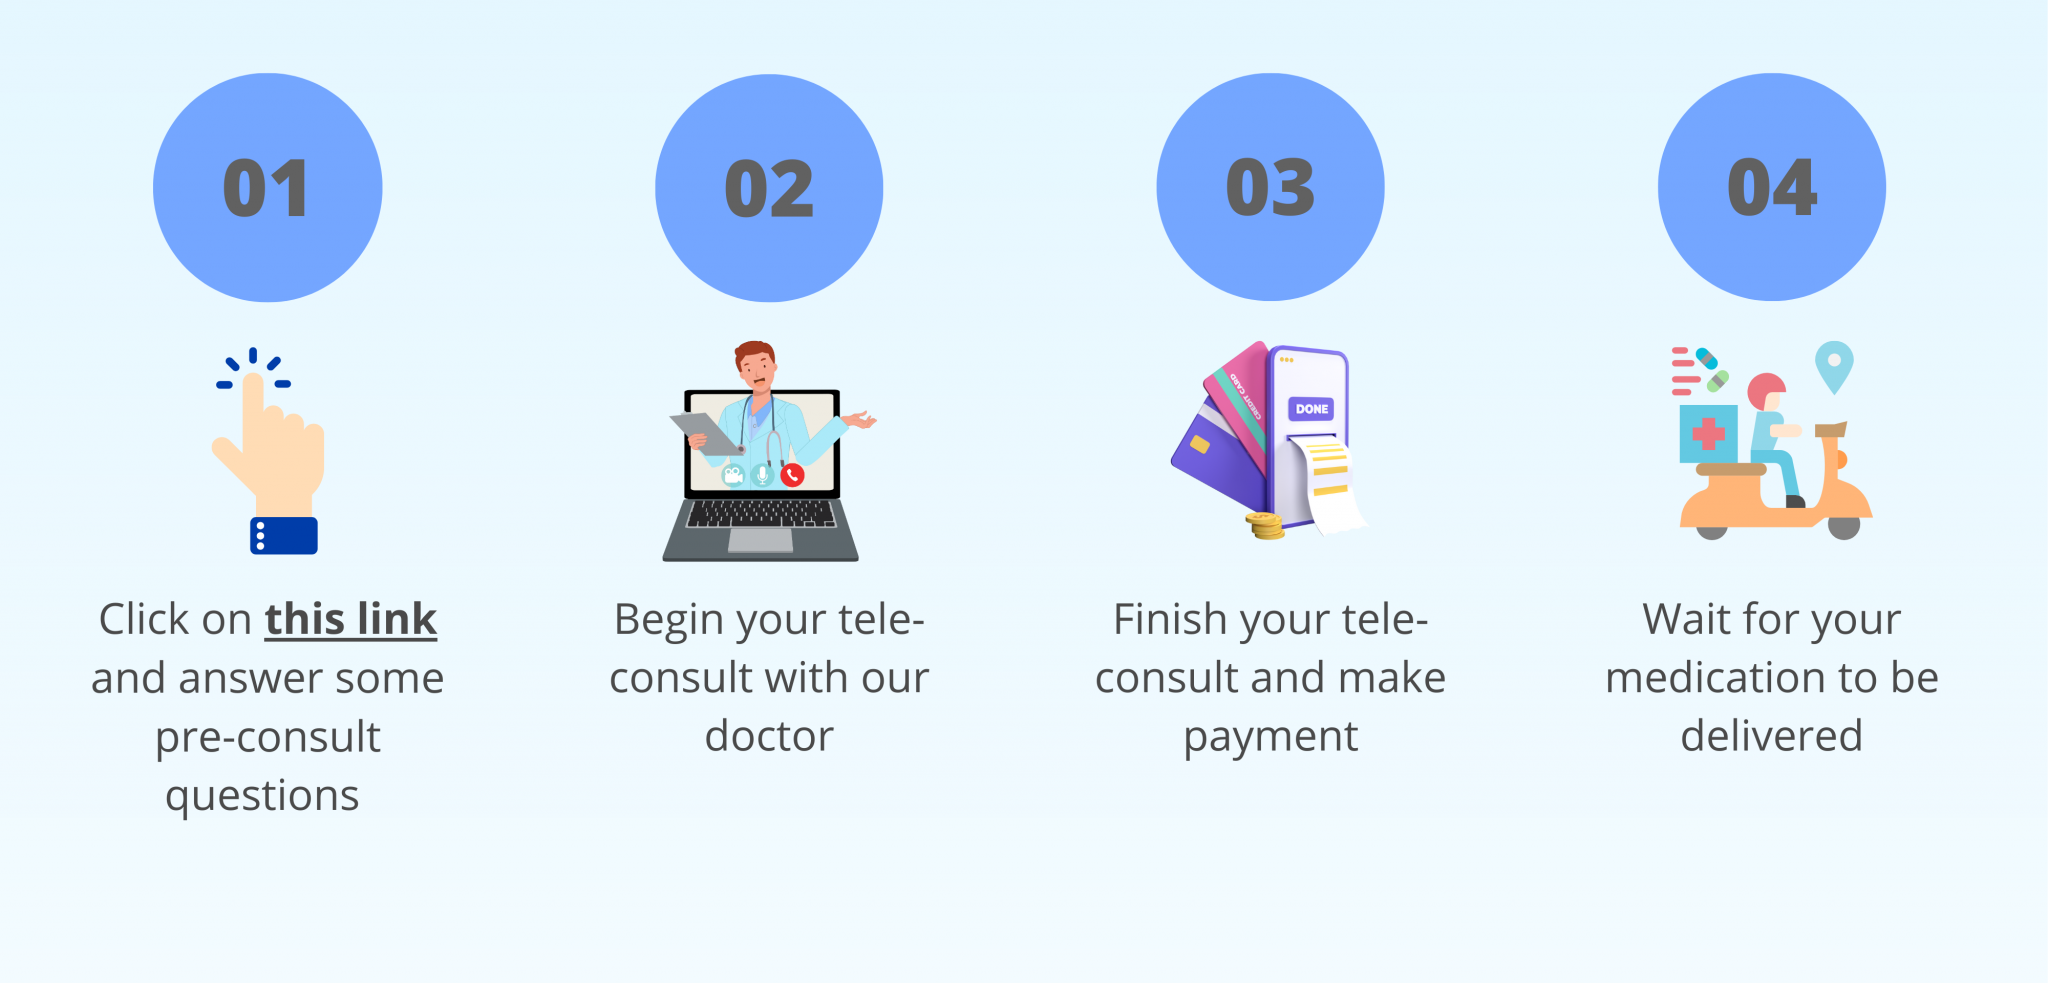 Access Virtual Healthcare With Teleconsultation in Singapore